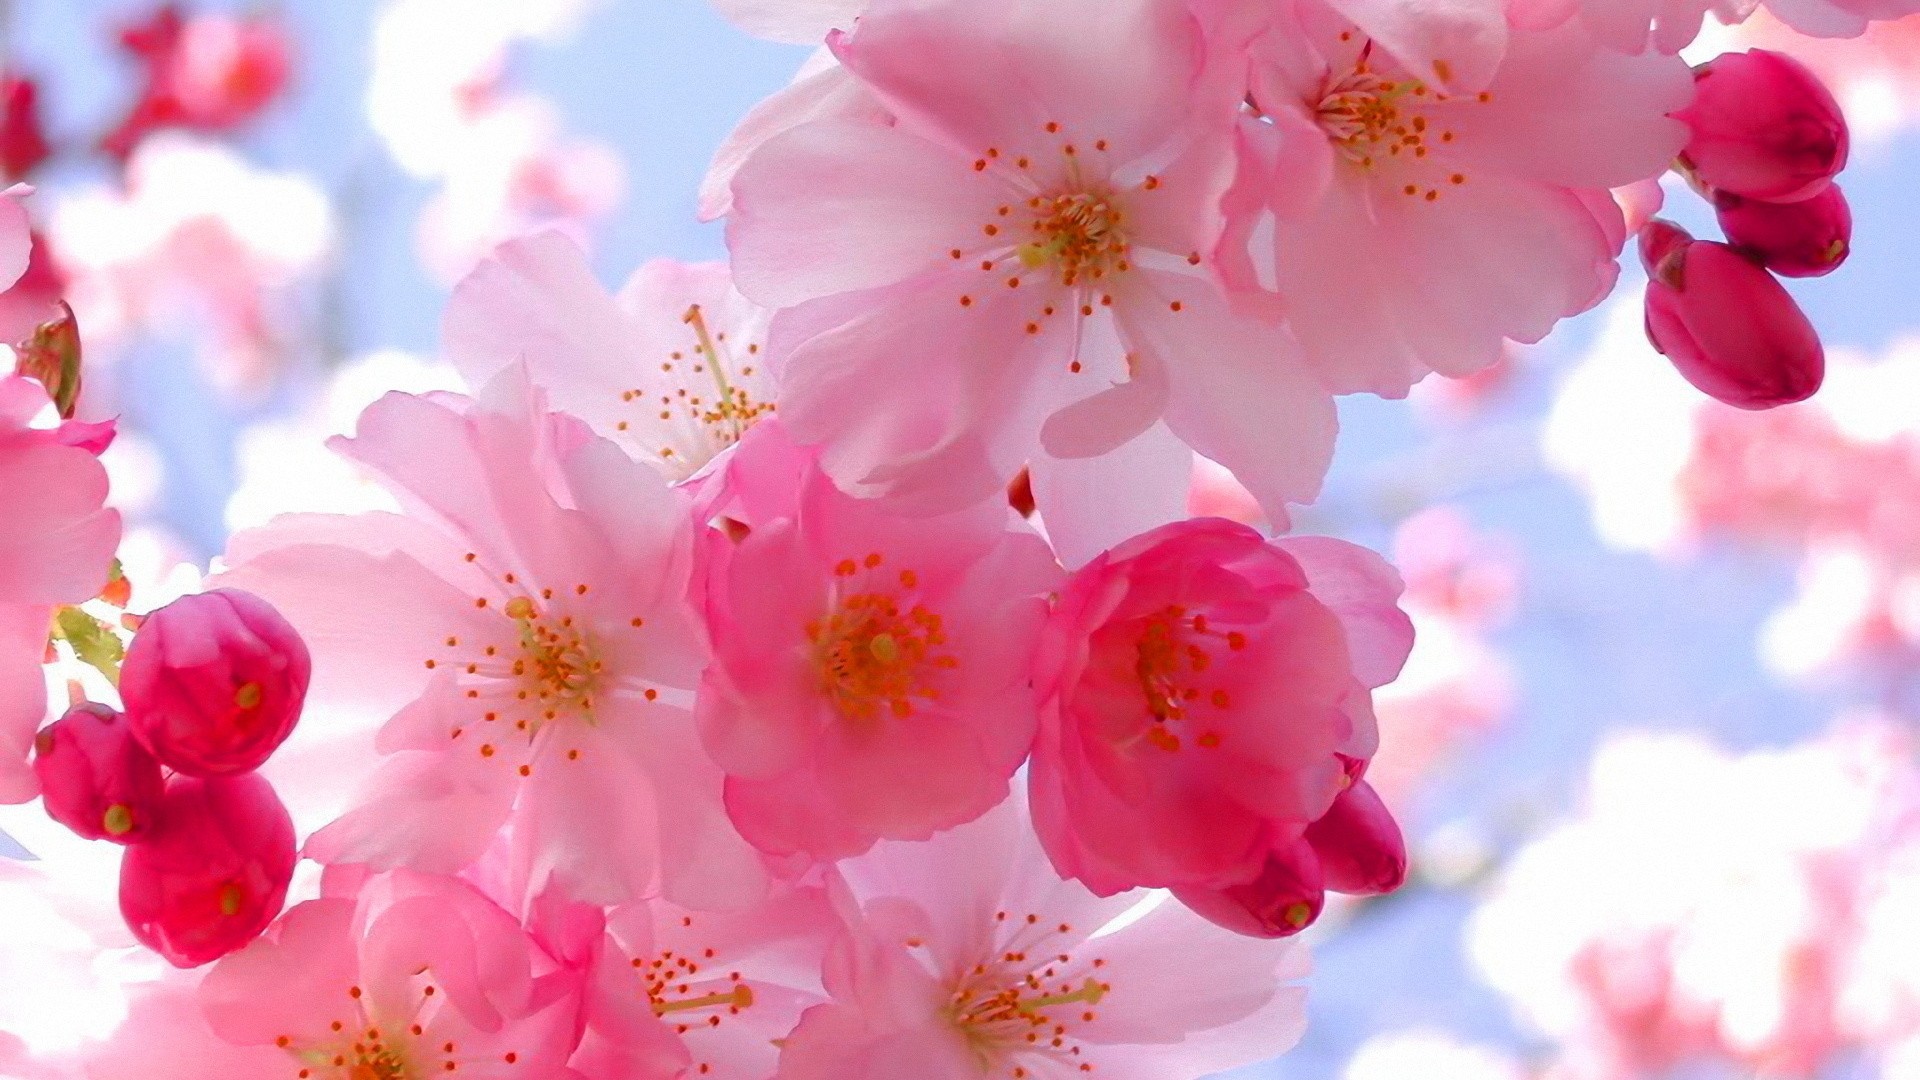 General 1920x1080 plants pink flowers nature photography cherry blossom